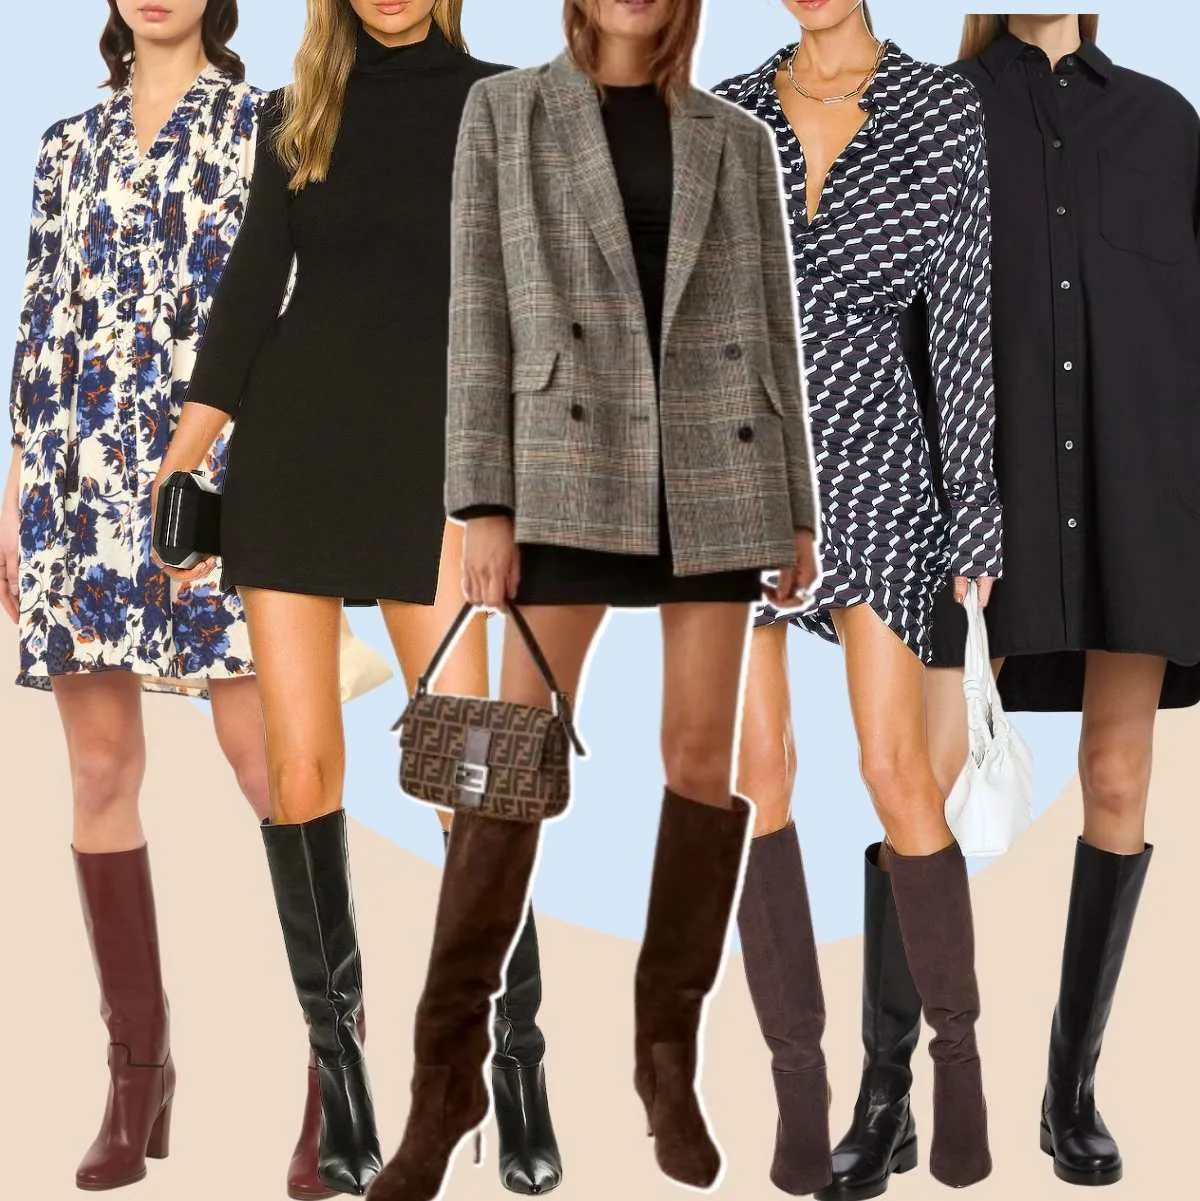 Collage of 5 women different knee boots with mini dresses.